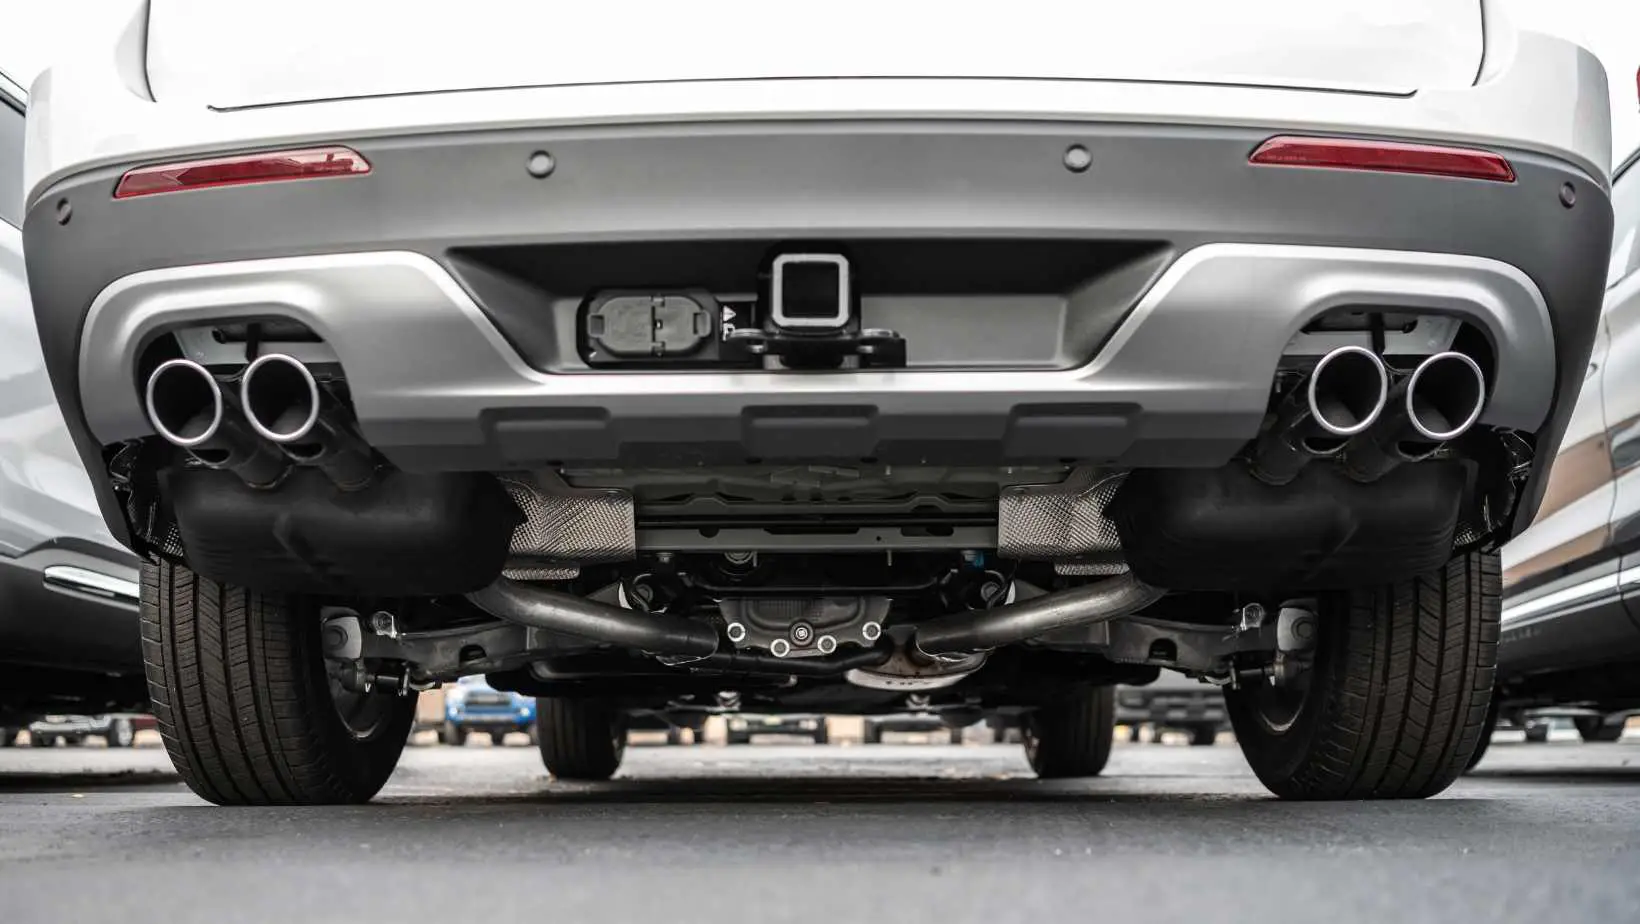 What is a cat-back exhaust system?